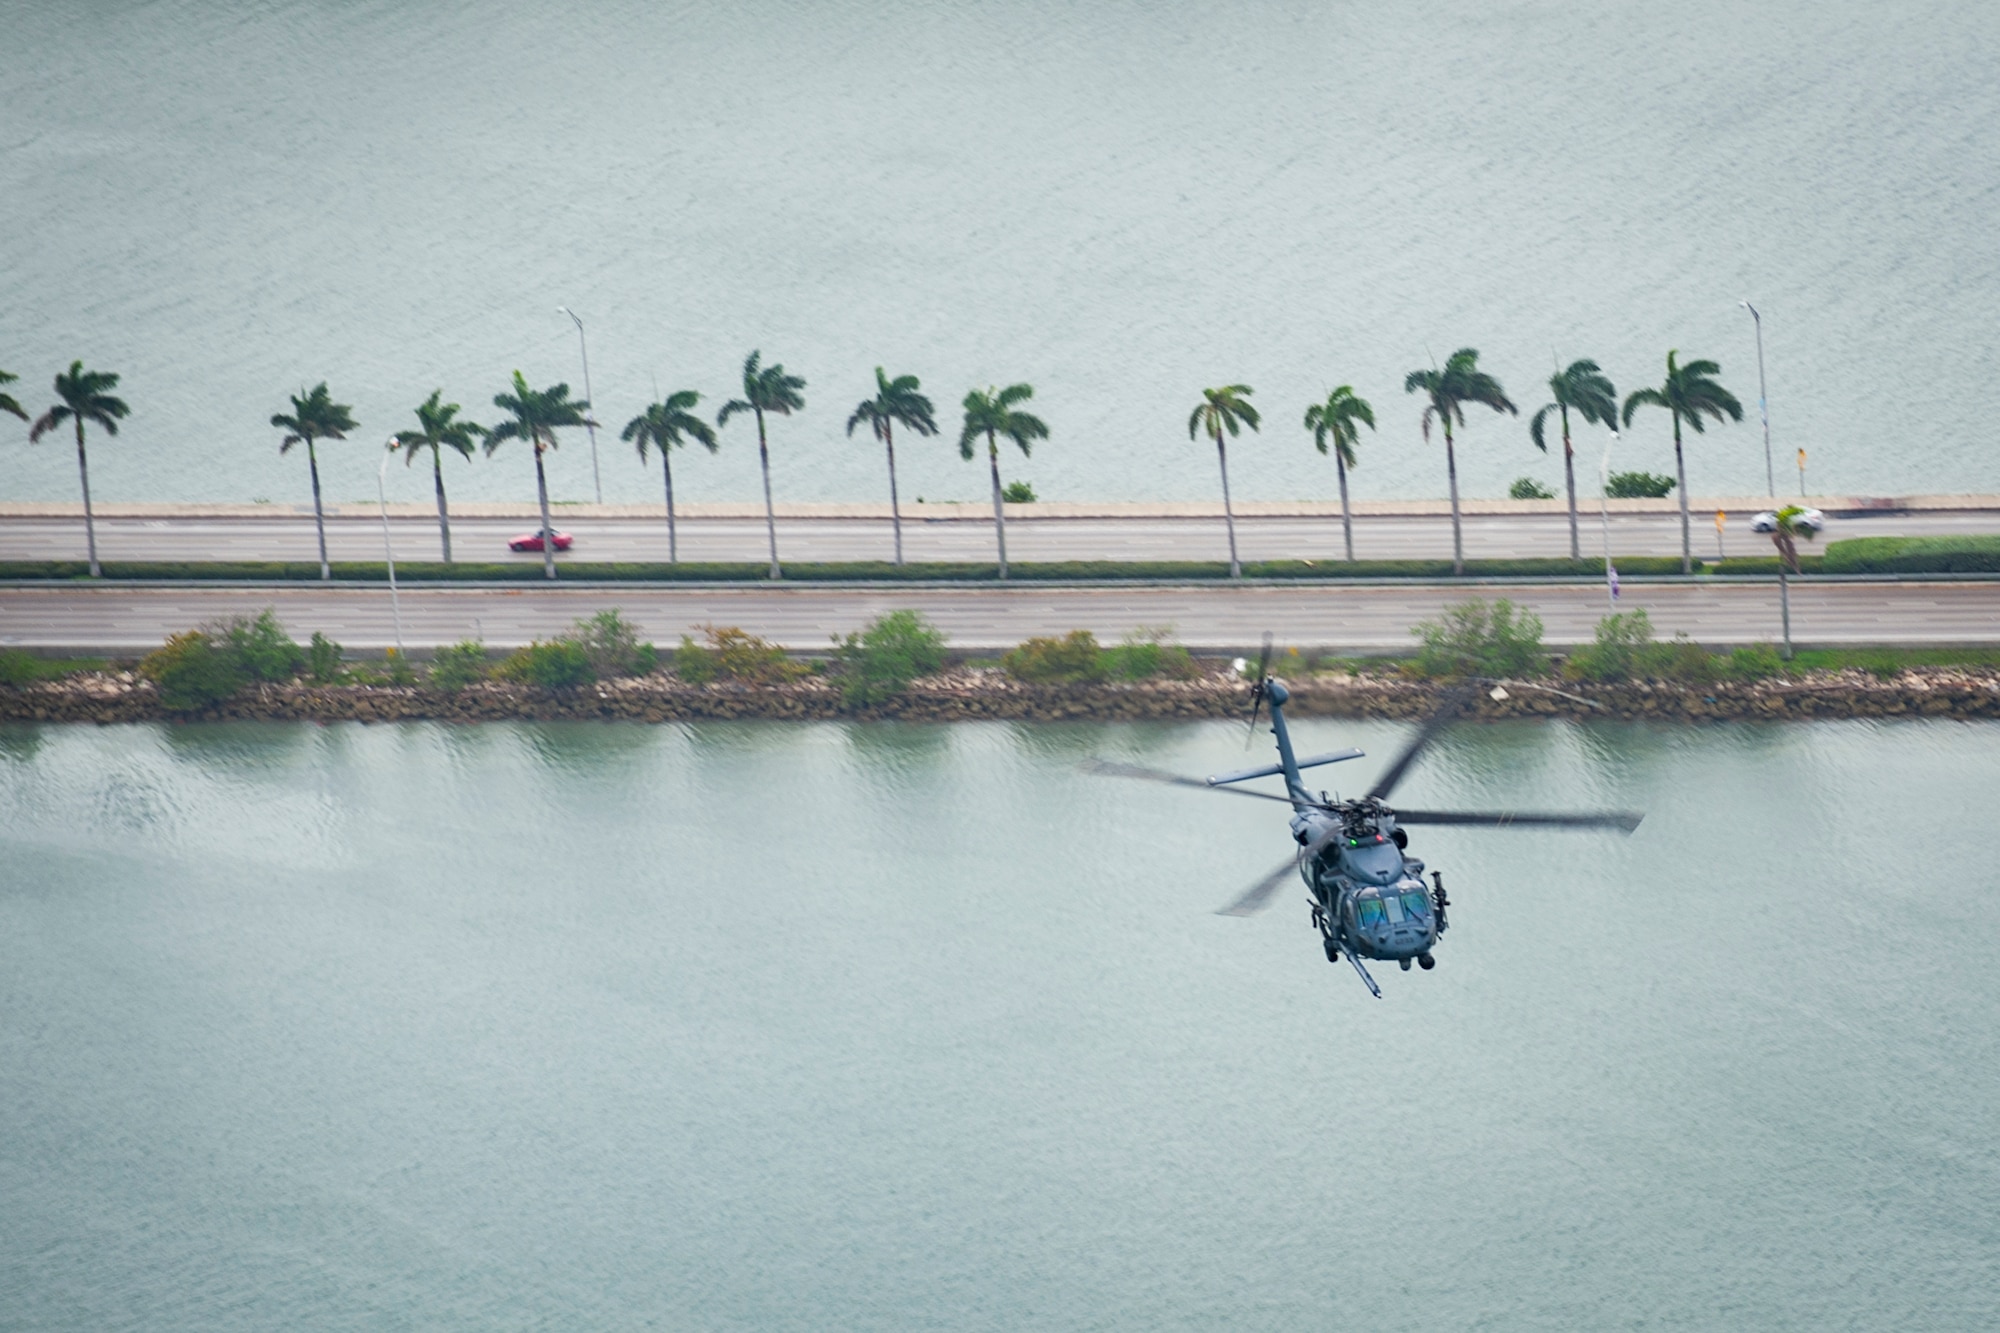 Air Force Reserve Citizen Airmen from the 301st Rescue Squadron out of Patrick Air Force Base in Cocoa Beach, Florida fly near Miami Beach aboard an HH-60G Pave Hawk helicopter on May 25th, 2018 during a practice run for the 2nd annual Salute to American Heroes Air and Sea Show. This two-day event showcases military fighter jets and other aircraft and equipment from all branches of the United States military in observance of Memorial Day, honoring servicemembers who have made the ultimate sacrifice. (U.S. Air Force photo/Staff Sgt. Jared Trimarchi)